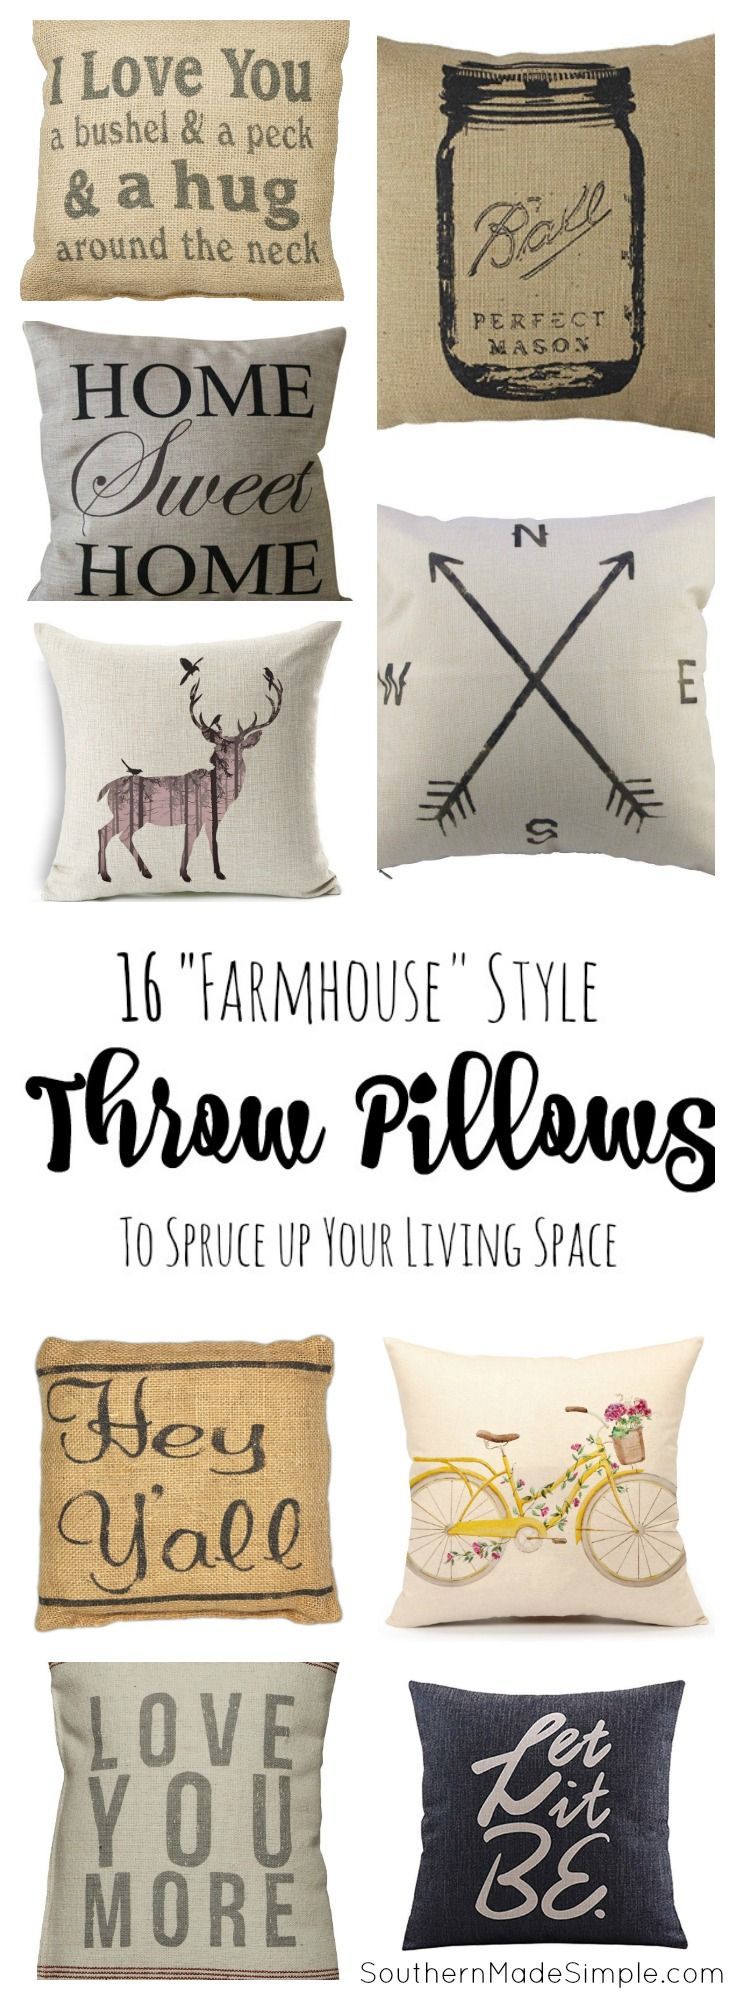 16 Farmhouse Style Pillows to Spruce up your Home Decor – and all available on Amazon!